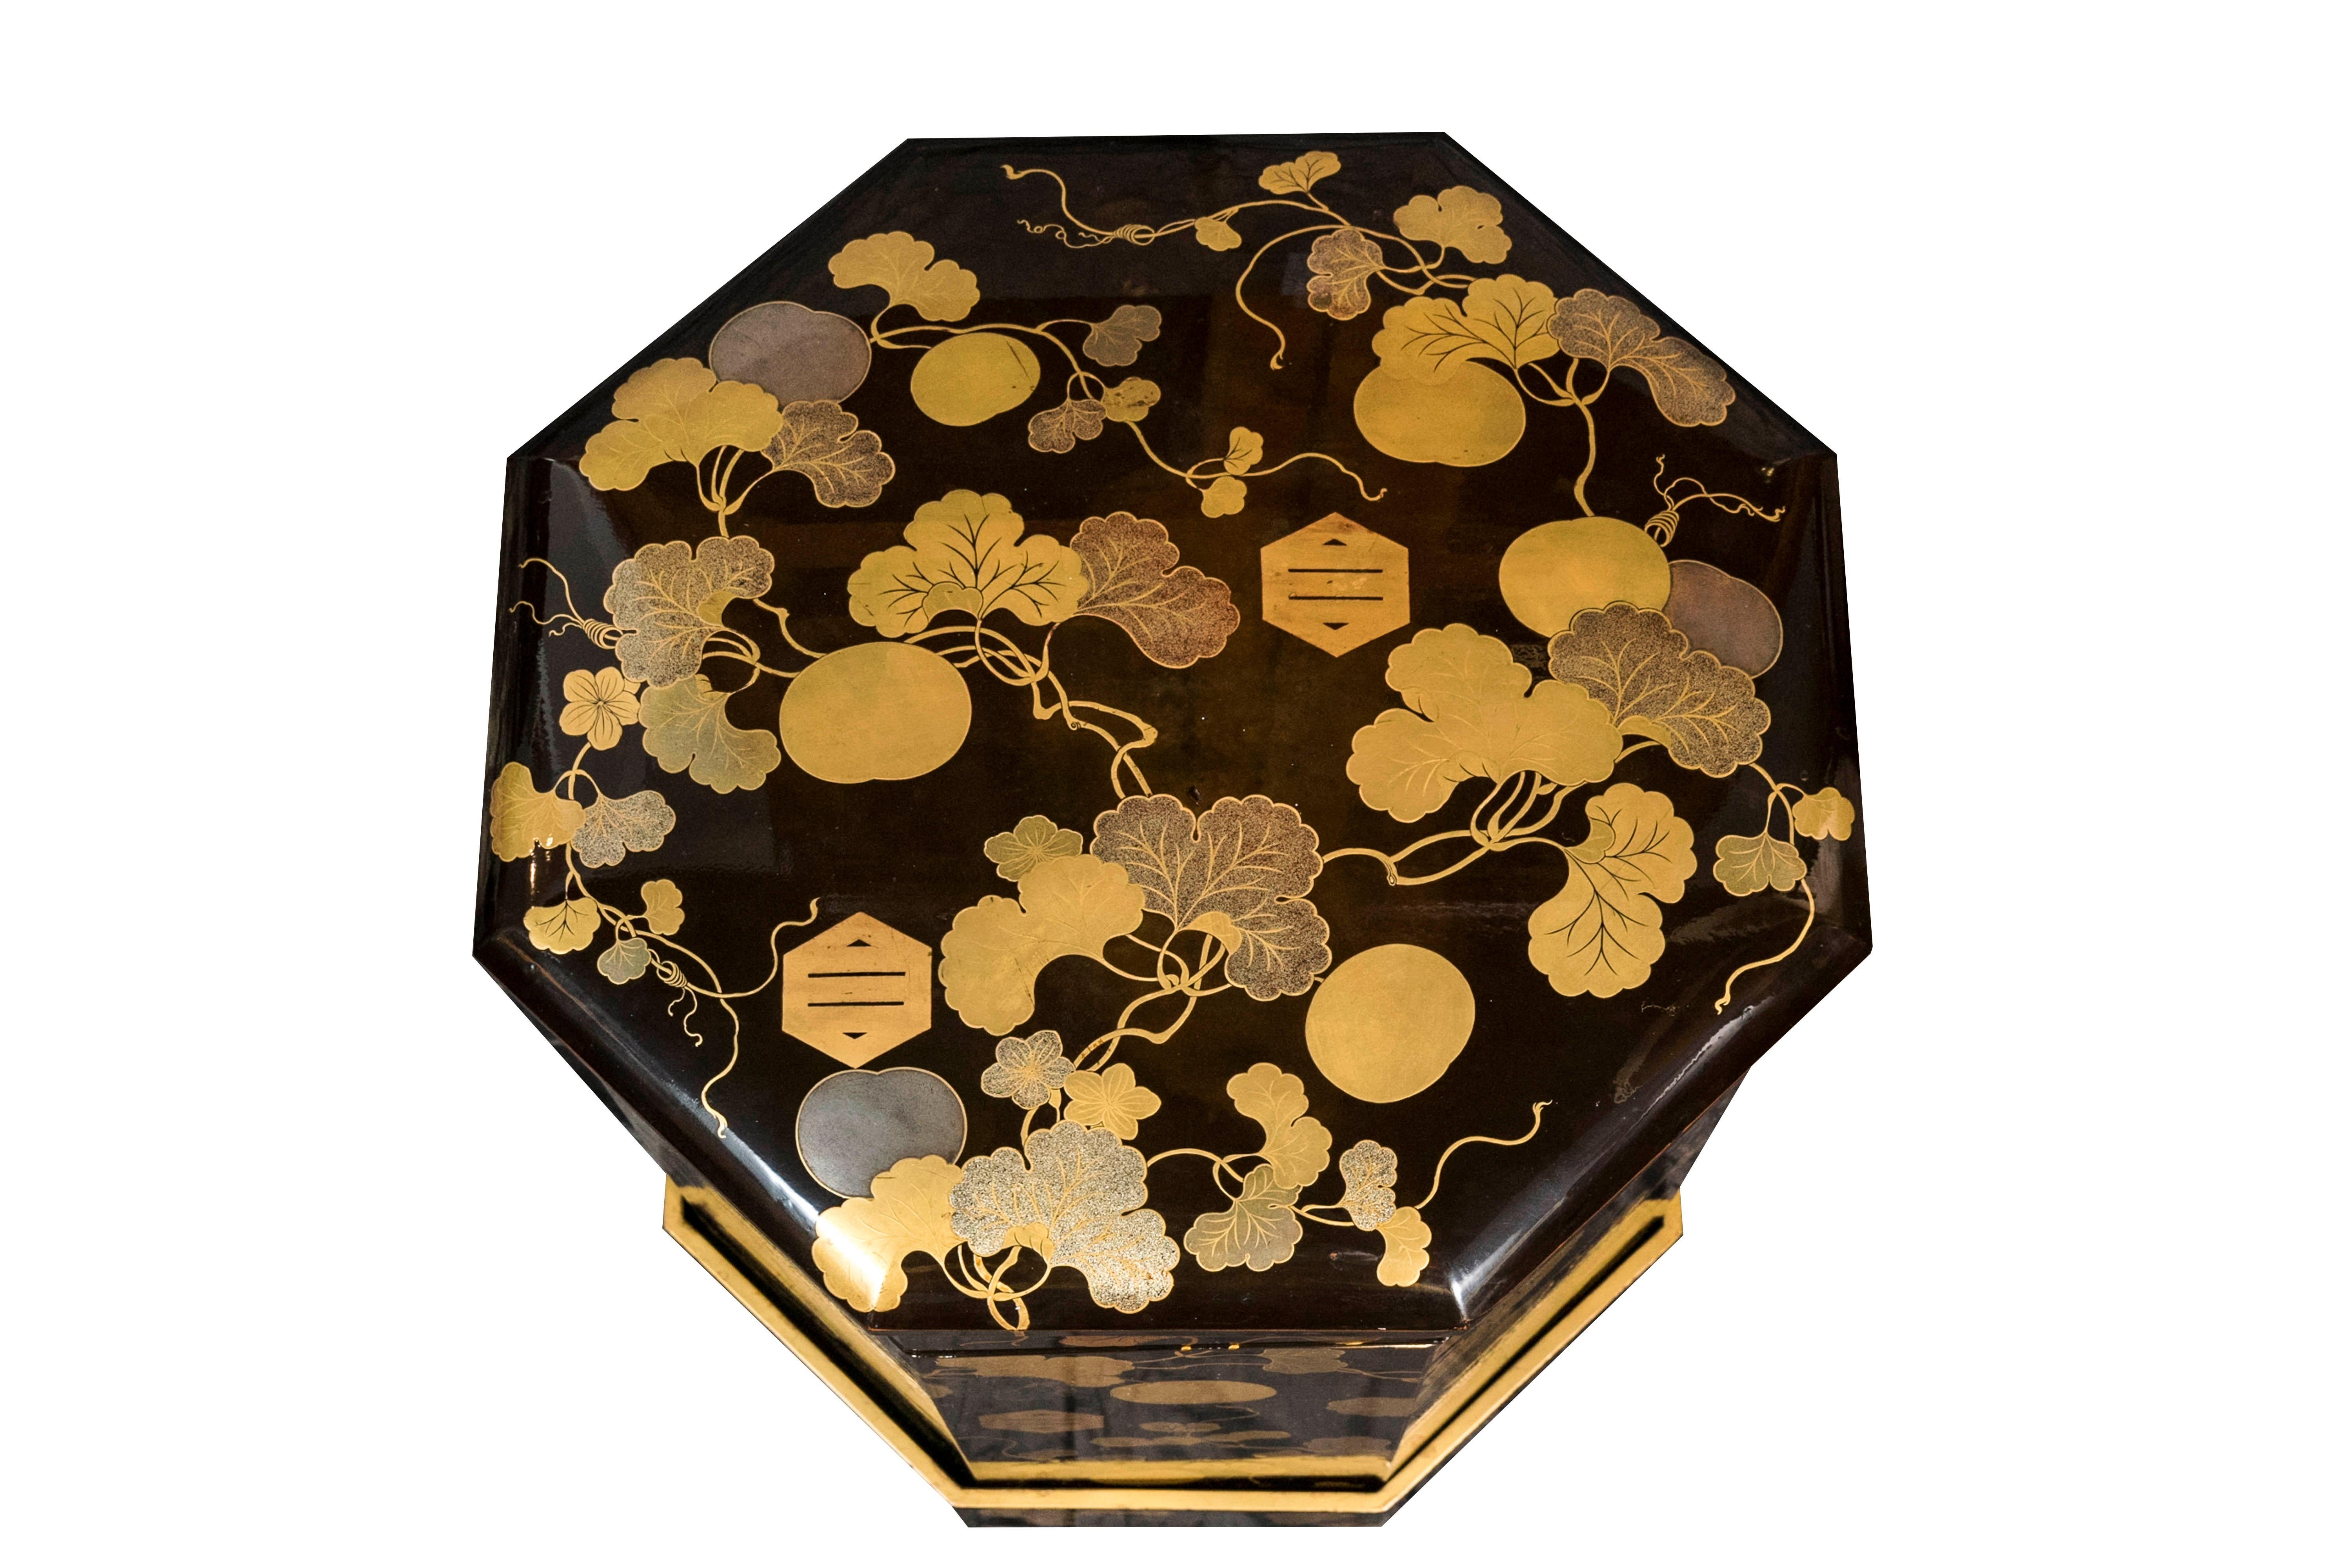 Japanese Black and Gold Lacquer Kaioke Boxes 'Hokaibako' For Sale 4